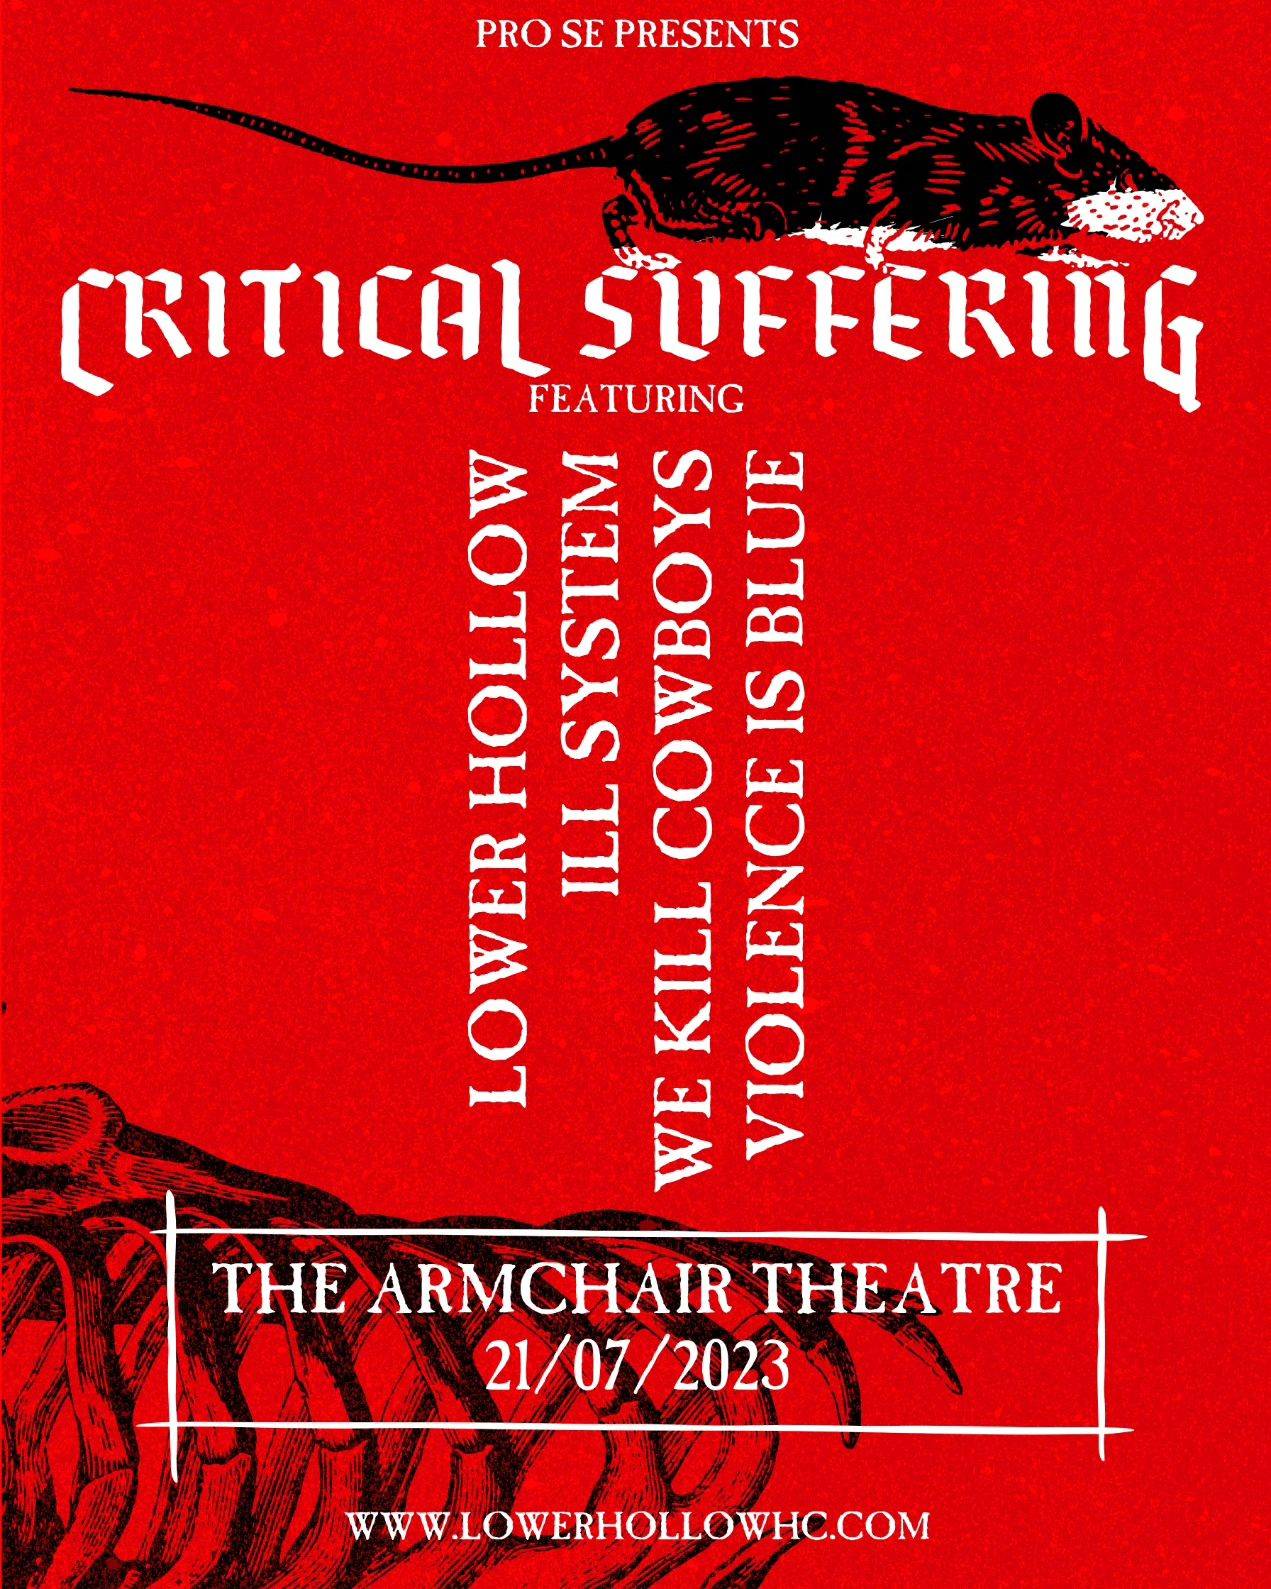 Critical Suffering featuring Lower Hollow & Ill System & We kill Cowboys & Violence is BlueGiggity, Cape Town